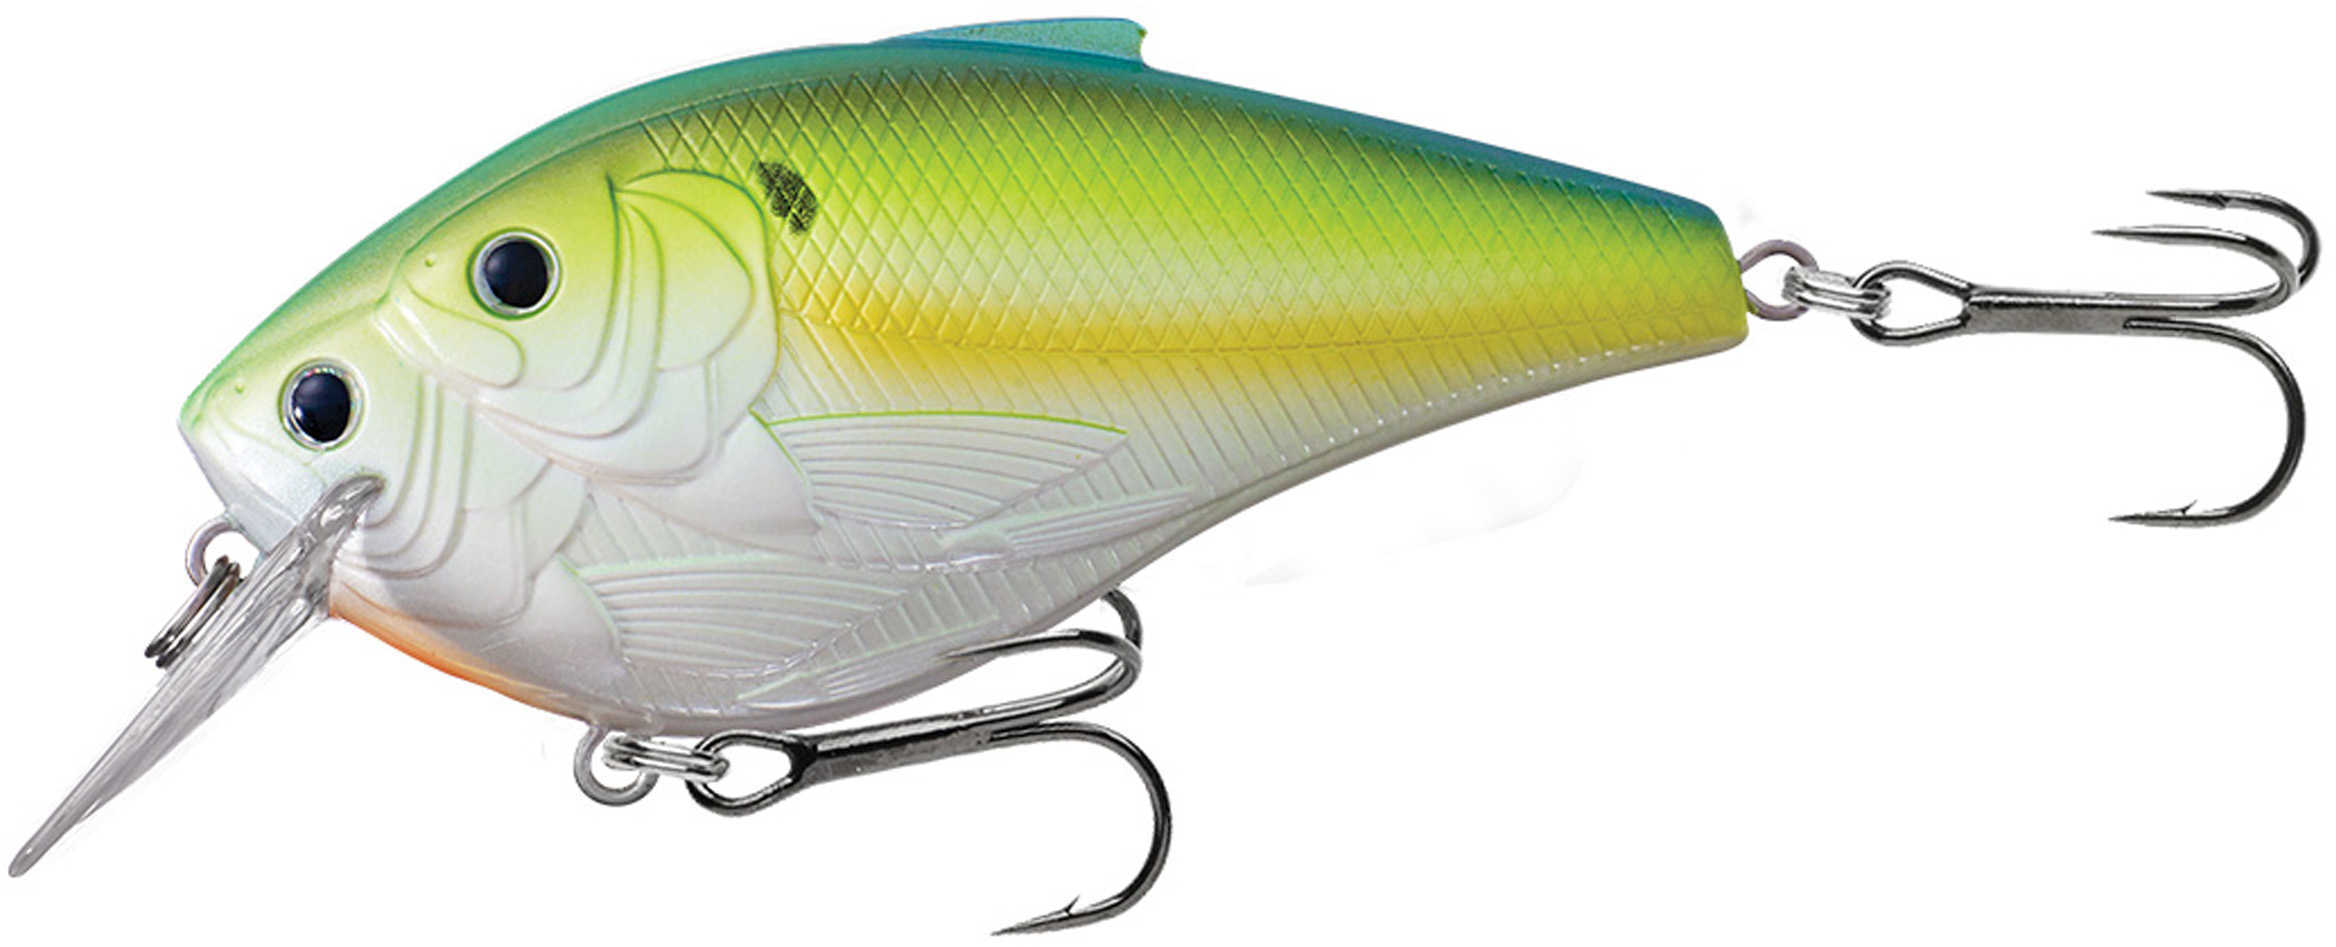 LIVETARGET Lures / Koppers Fishing and Tackle Corp Threadfin Shad Squarebill 3" Number 1 Hook Size 4-5 Depth Chartreuse/Pearl/Blue